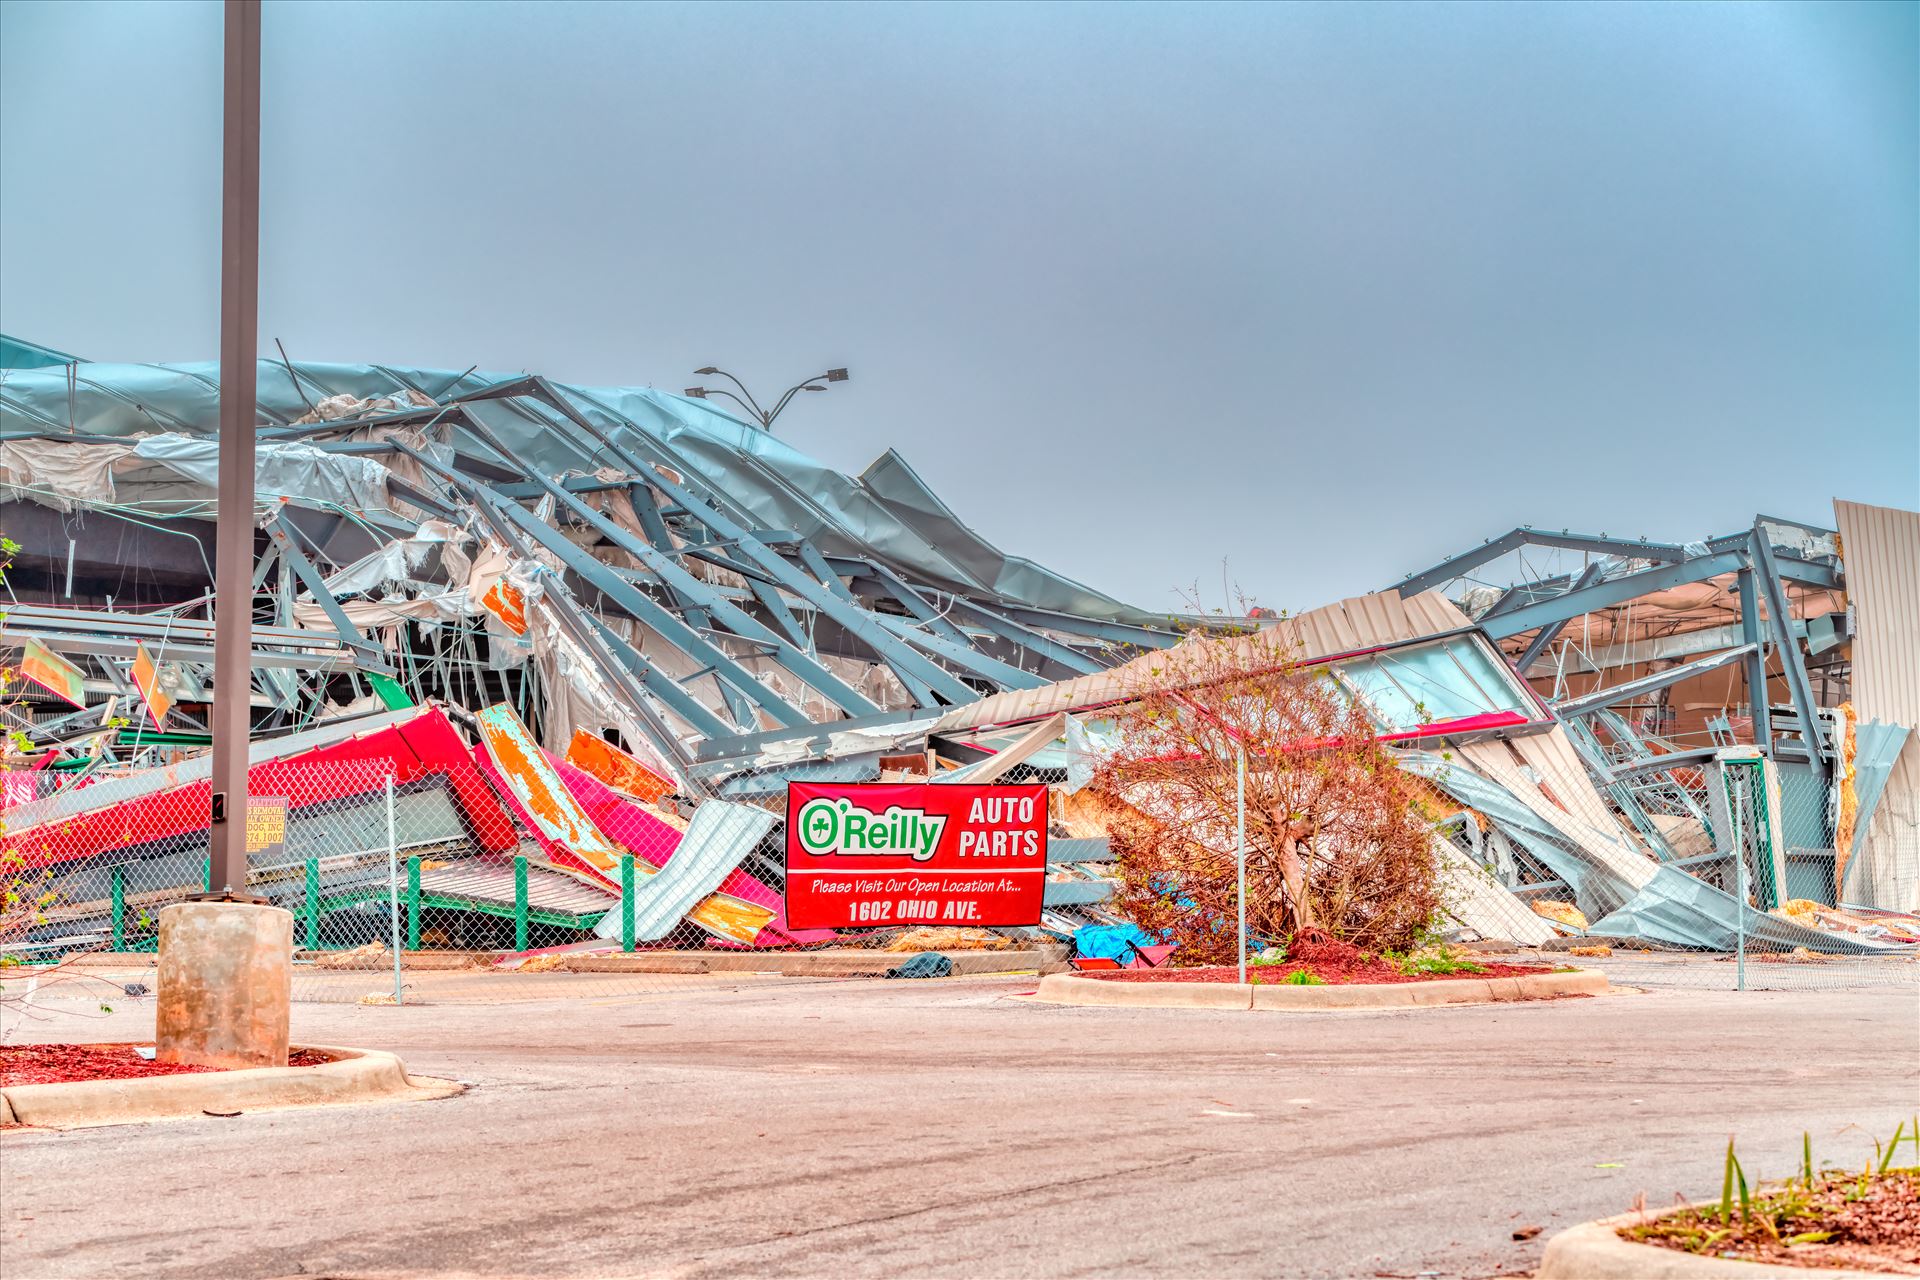 Hurricane Michael - Panama City, Florida, USA 12/30/2018 O'Reilly Auto Parts on HWY 98 destroyed by hurricane Michael by Terry Kelly Photography